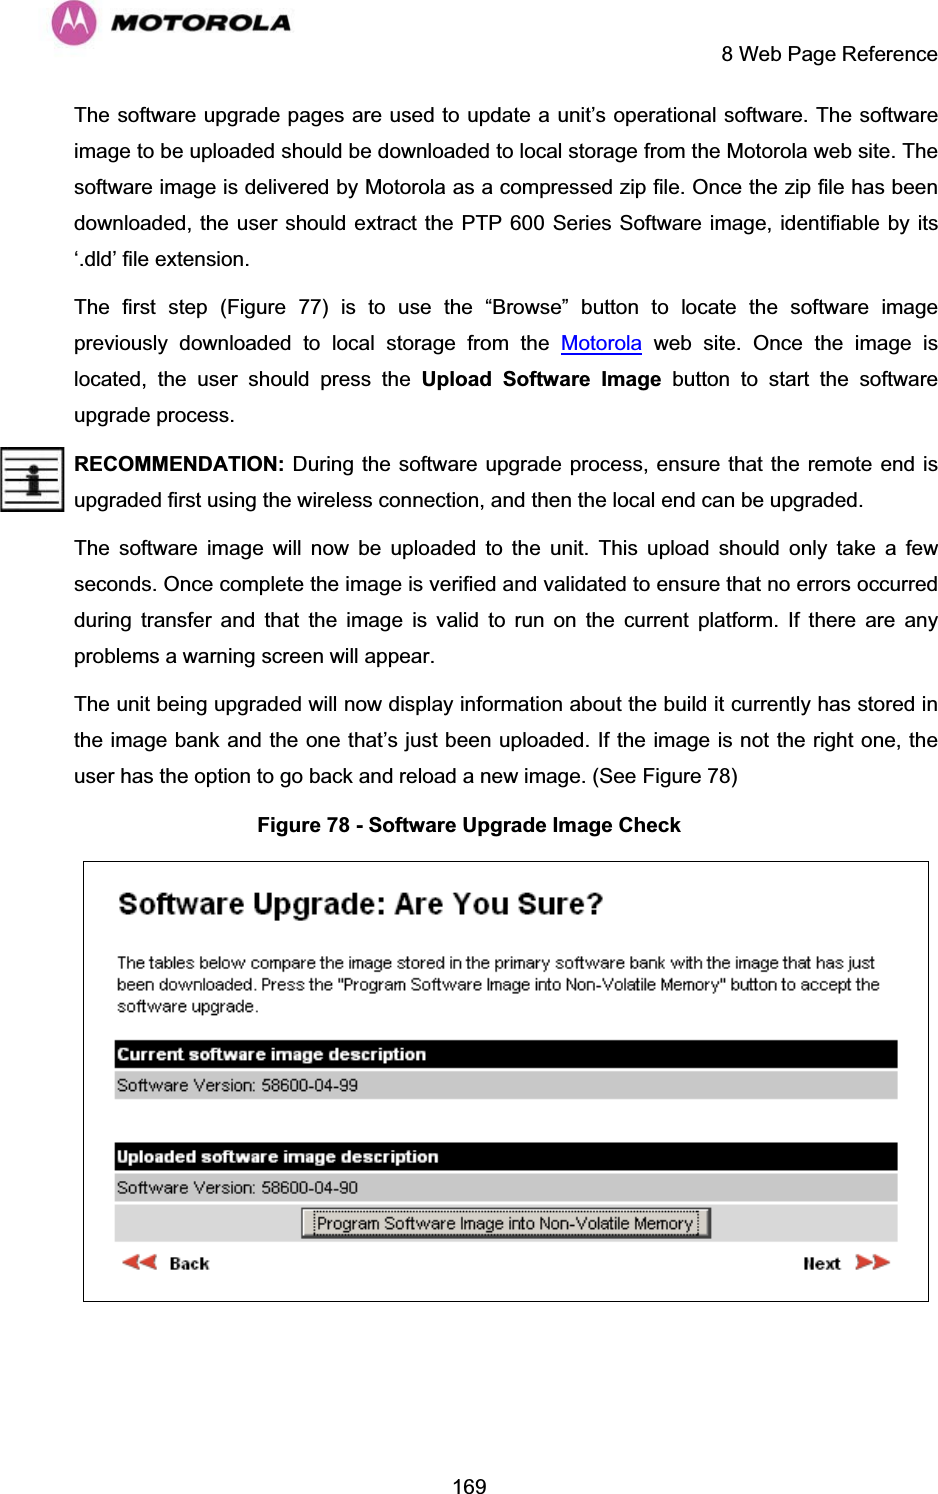     8 Web Page Reference  169The software upgrade pages are used to update a unit’s operational software. The software image to be uploaded should be downloaded to local storage from the Motorola web site. The software image is delivered by Motorola as a compressed zip file. Once the zip file has been downloaded, the user should extract the PTP 600 Series Software image, identifiable by its ‘.dld’ file extension. The first step (Figure 77) is to use the “Browse” button to locate the software image previously downloaded to local storage from the Motorola web site. Once the image is located, the user should press the Upload Software Image button to start the software upgrade process.  RECOMMENDATION: During the software upgrade process, ensure that the remote end is upgraded first using the wireless connection, and then the local end can be upgraded. The software image will now be uploaded to the unit. This upload should only take a few seconds. Once complete the image is verified and validated to ensure that no errors occurred during transfer and that the image is valid to run on the current platform. If there are any problems a warning screen will appear.  The unit being upgraded will now display information about the build it currently has stored in the image bank and the one that’s just been uploaded. If the image is not the right one, the user has the option to go back and reload a new image. (See Figure 78)  Figure 78 - Software Upgrade Image Check  